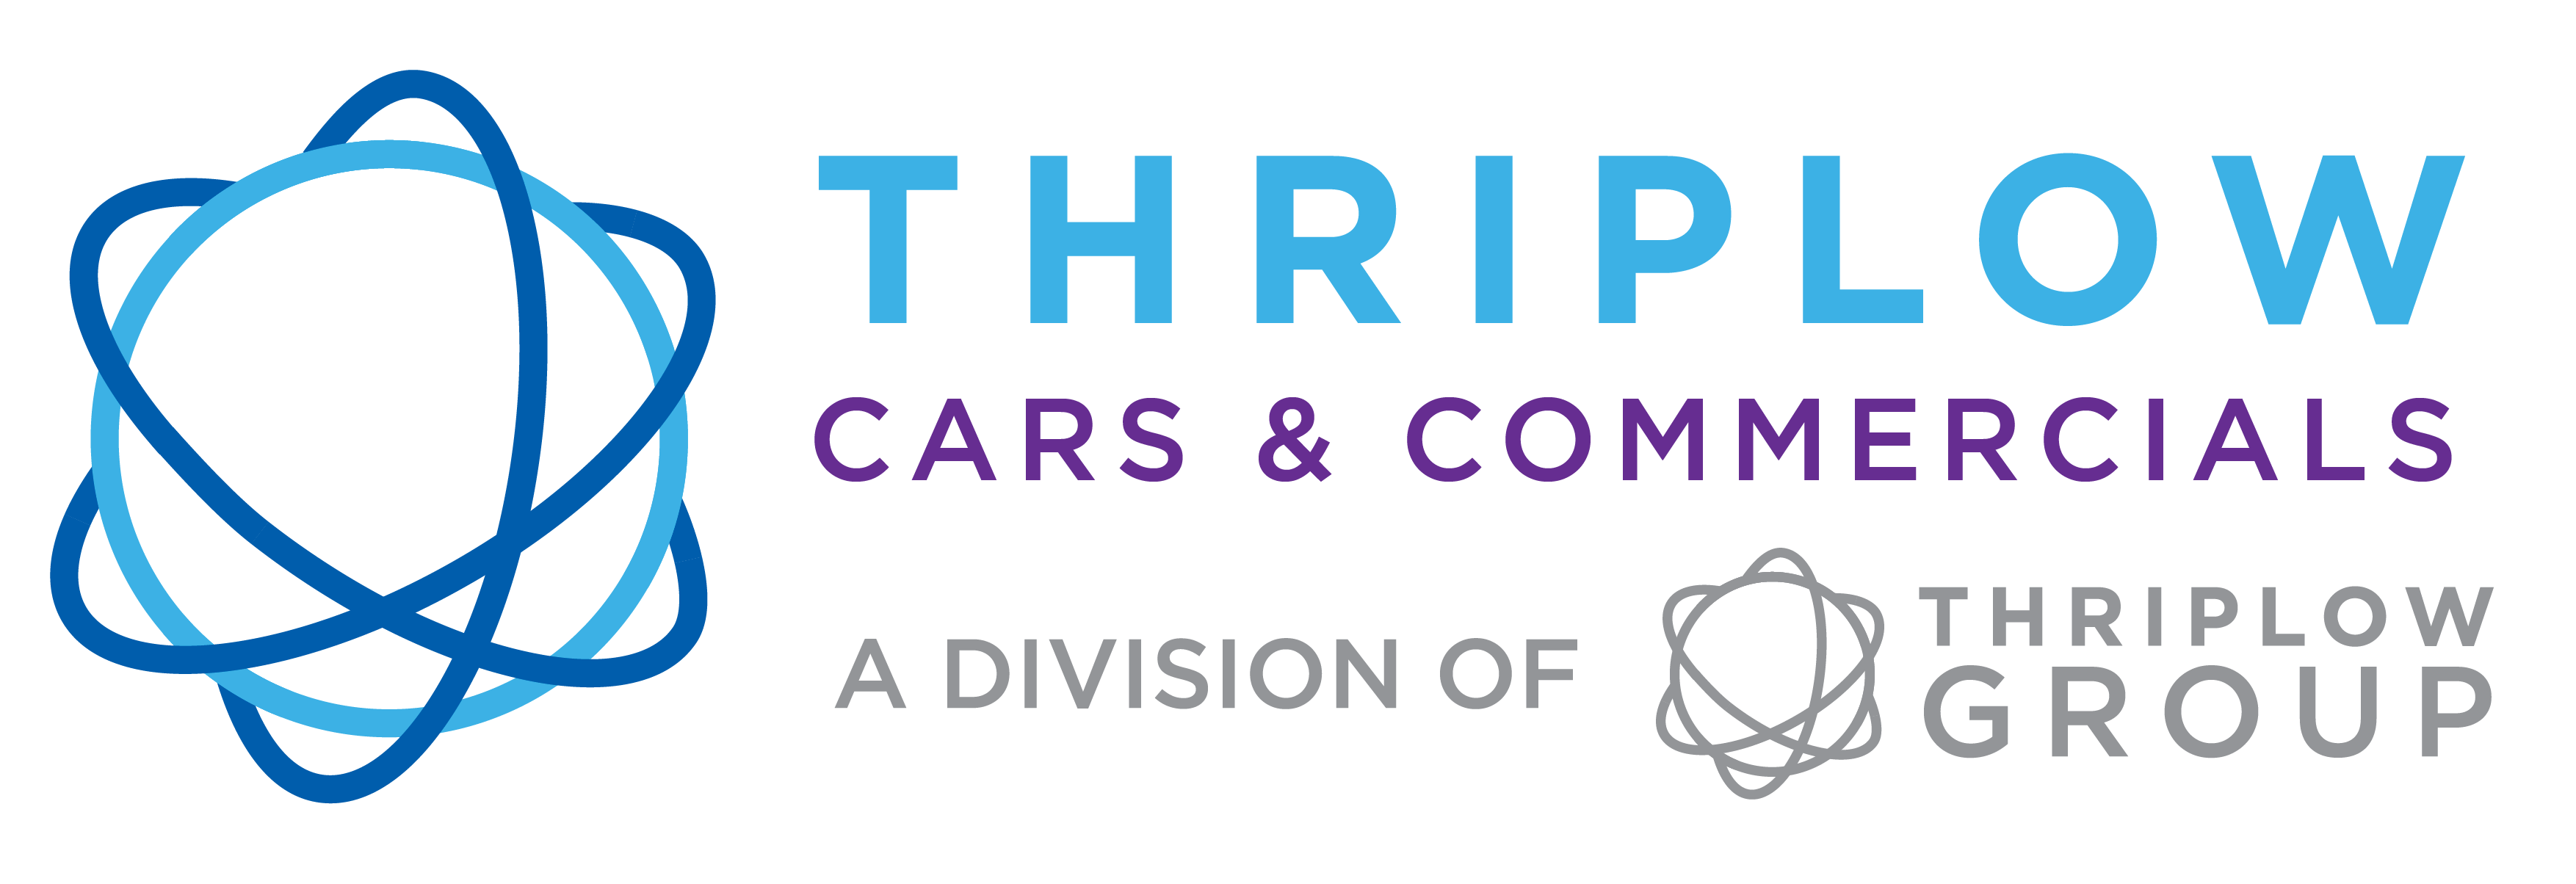 Thriplow cars & Commercials Logo-01